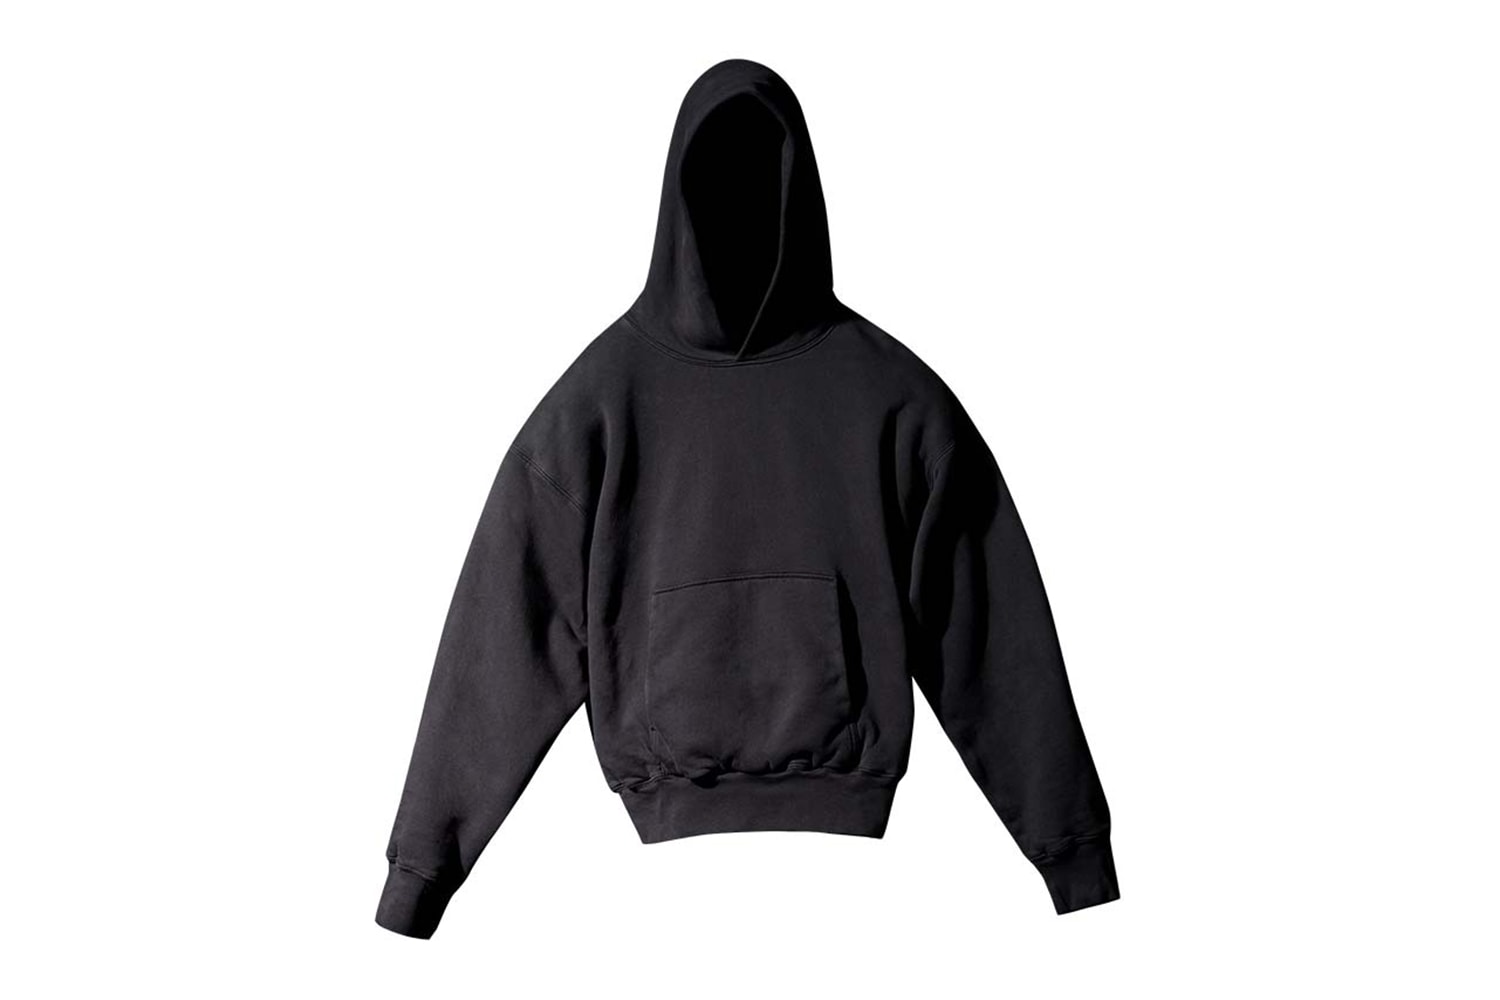 YEEZY GAP から2色の新作フーディがリリース Kanye West Heaven and Hell Music Video Debut YEEZY Gap TV Commercial Black Blue Hoodie Release Buy Price DONDA